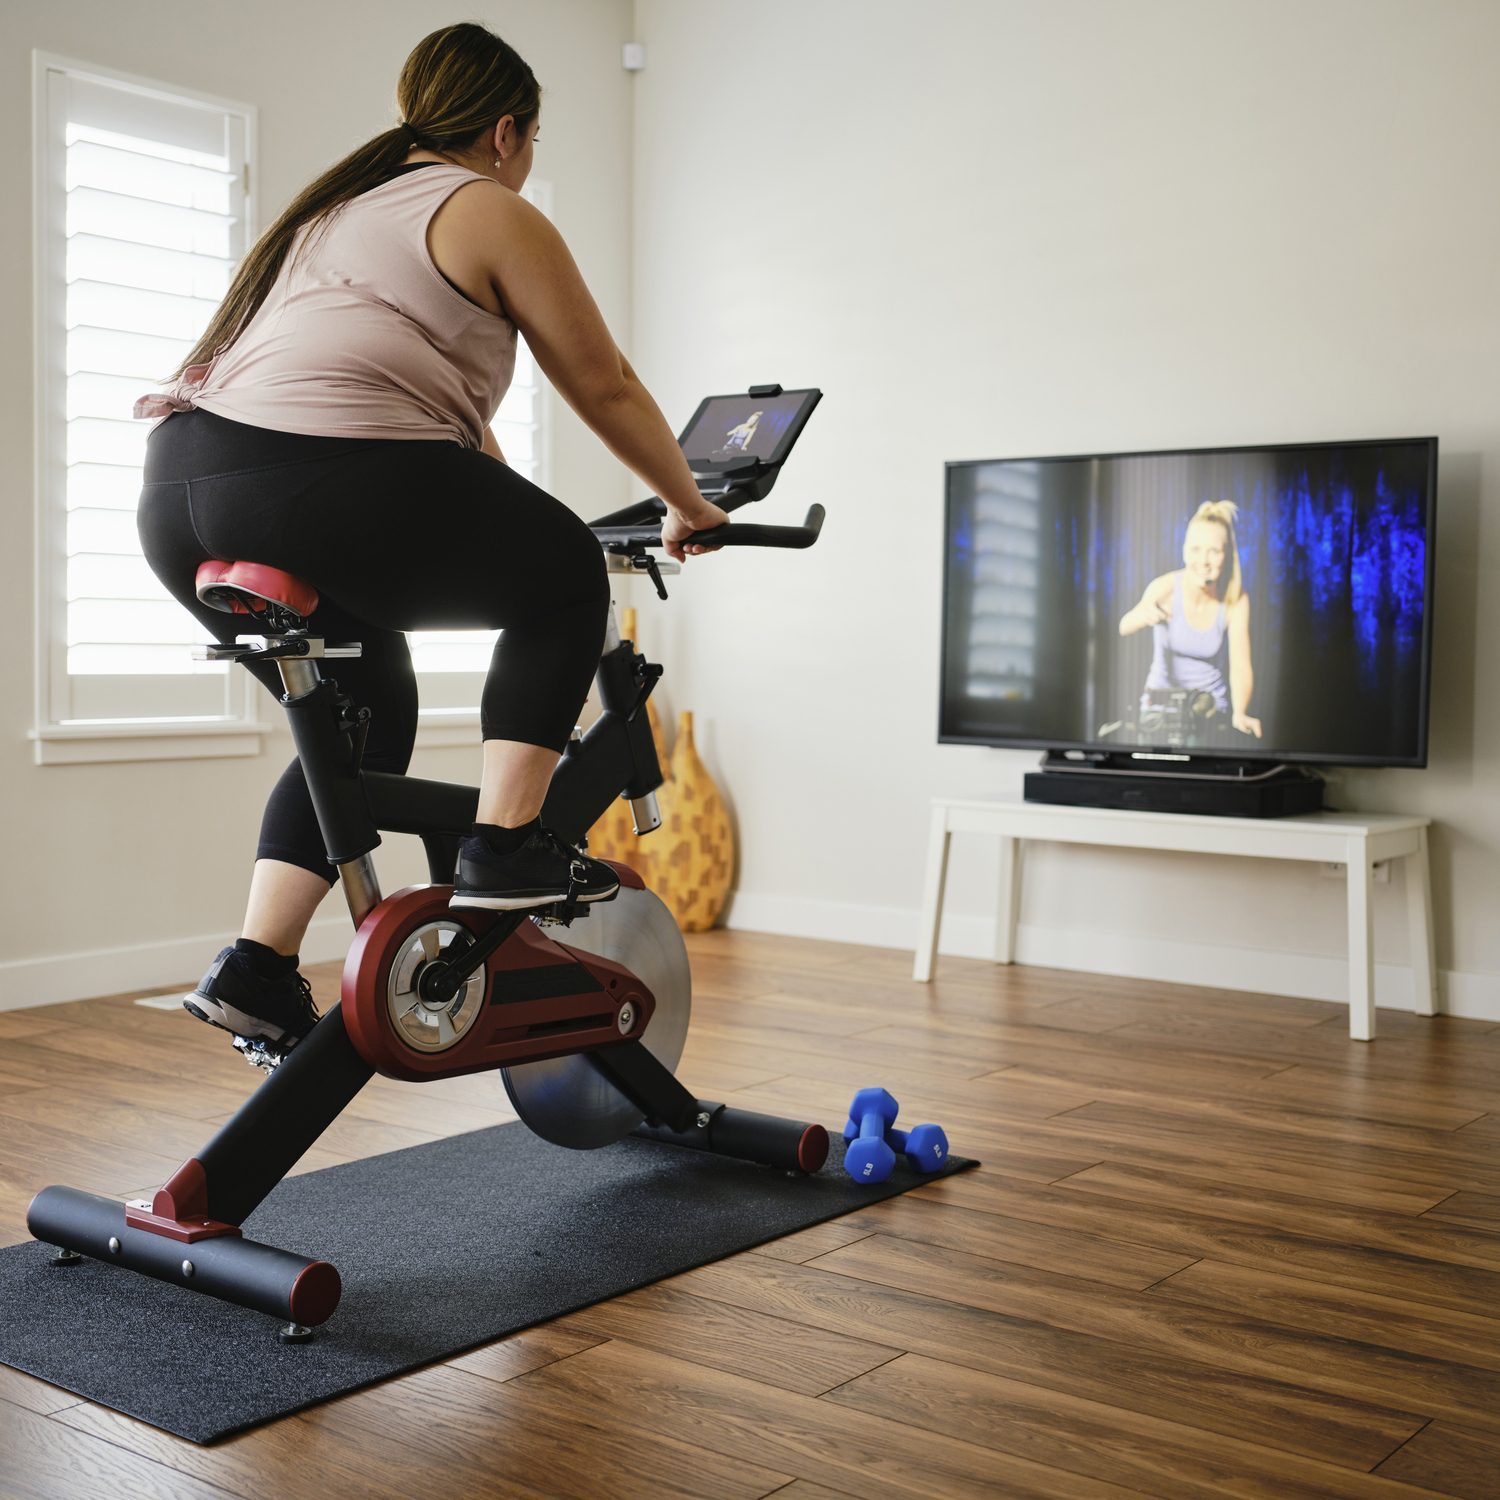 Benefits of Indoor Cycling Shoes for At-Home Exercise Bikes